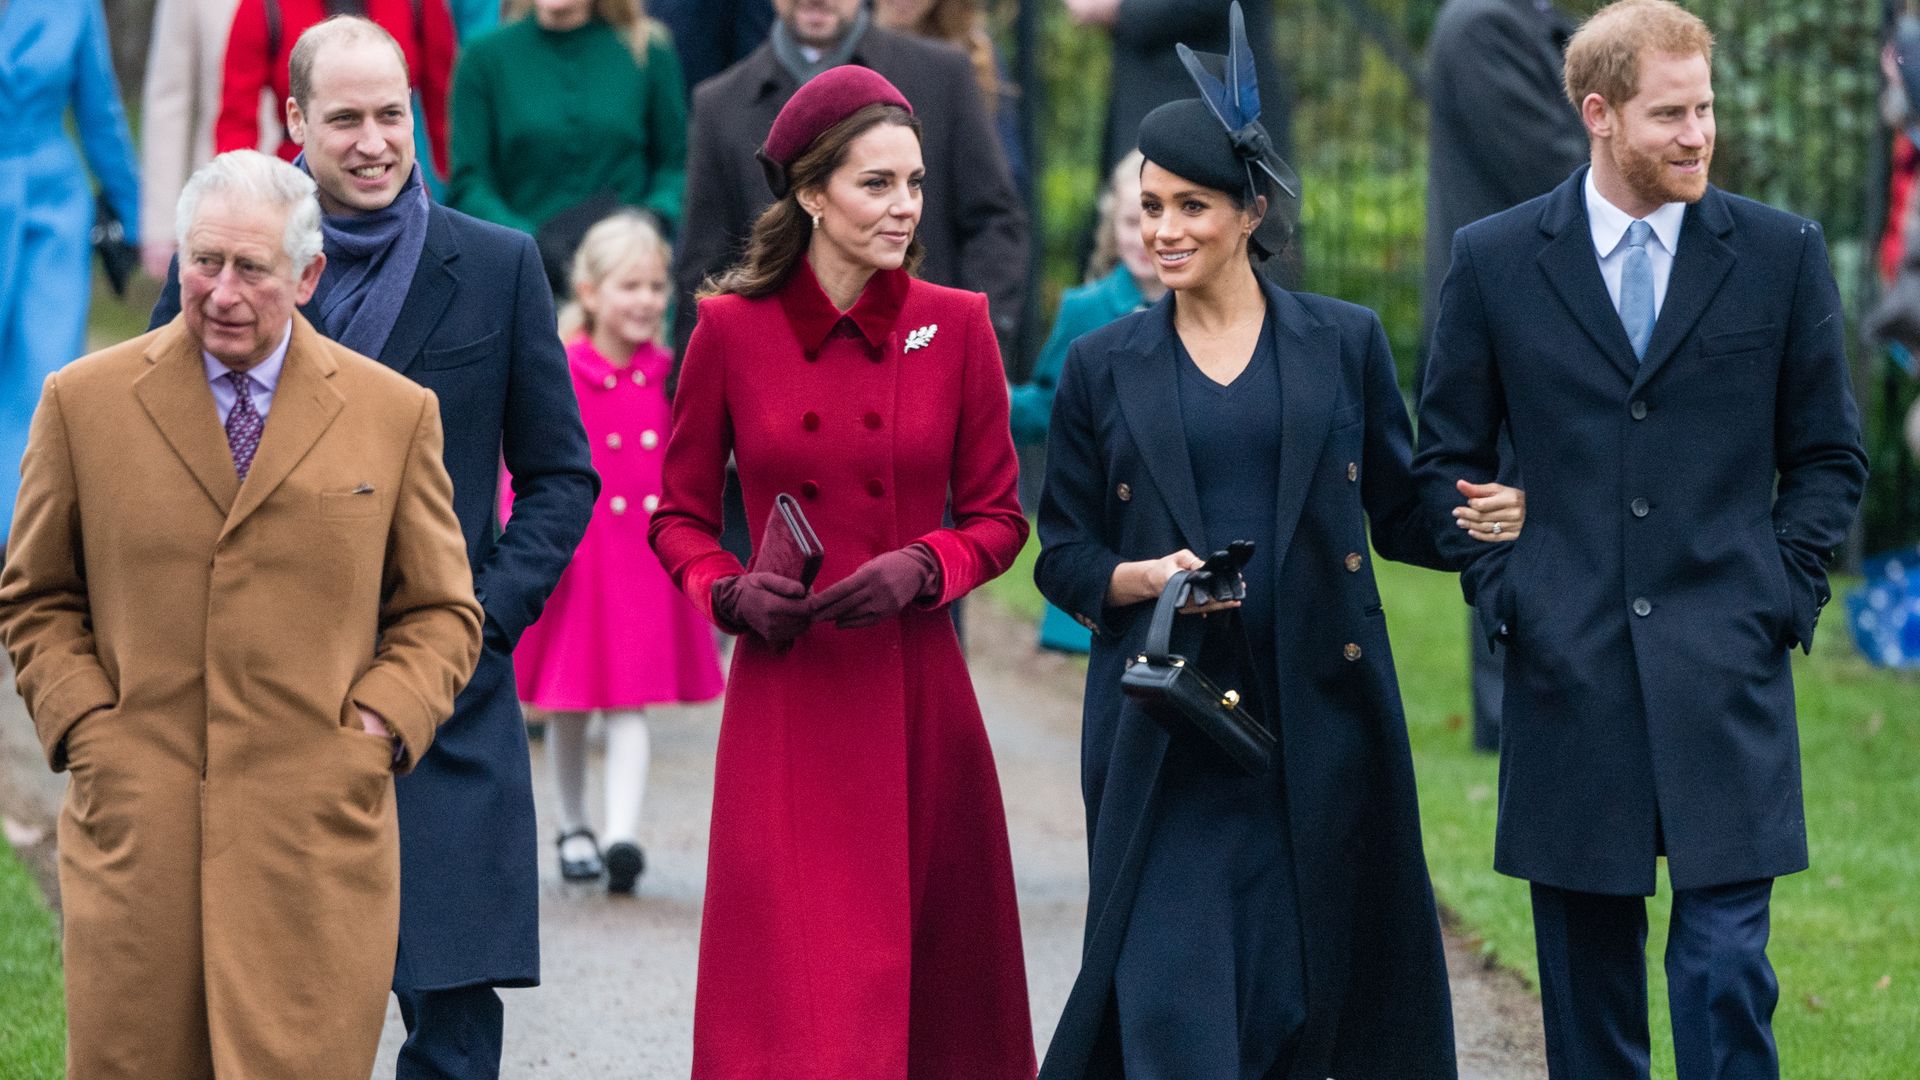 Prince Charles, Prince of Wales, Prince William, Duke of Cambridge, Catherine, Duchess of Cambridge, Meghan, Duchess of Sussex and Prince Harry, Duke of Sussex attend Christmas Day Church service on December 25, 2018